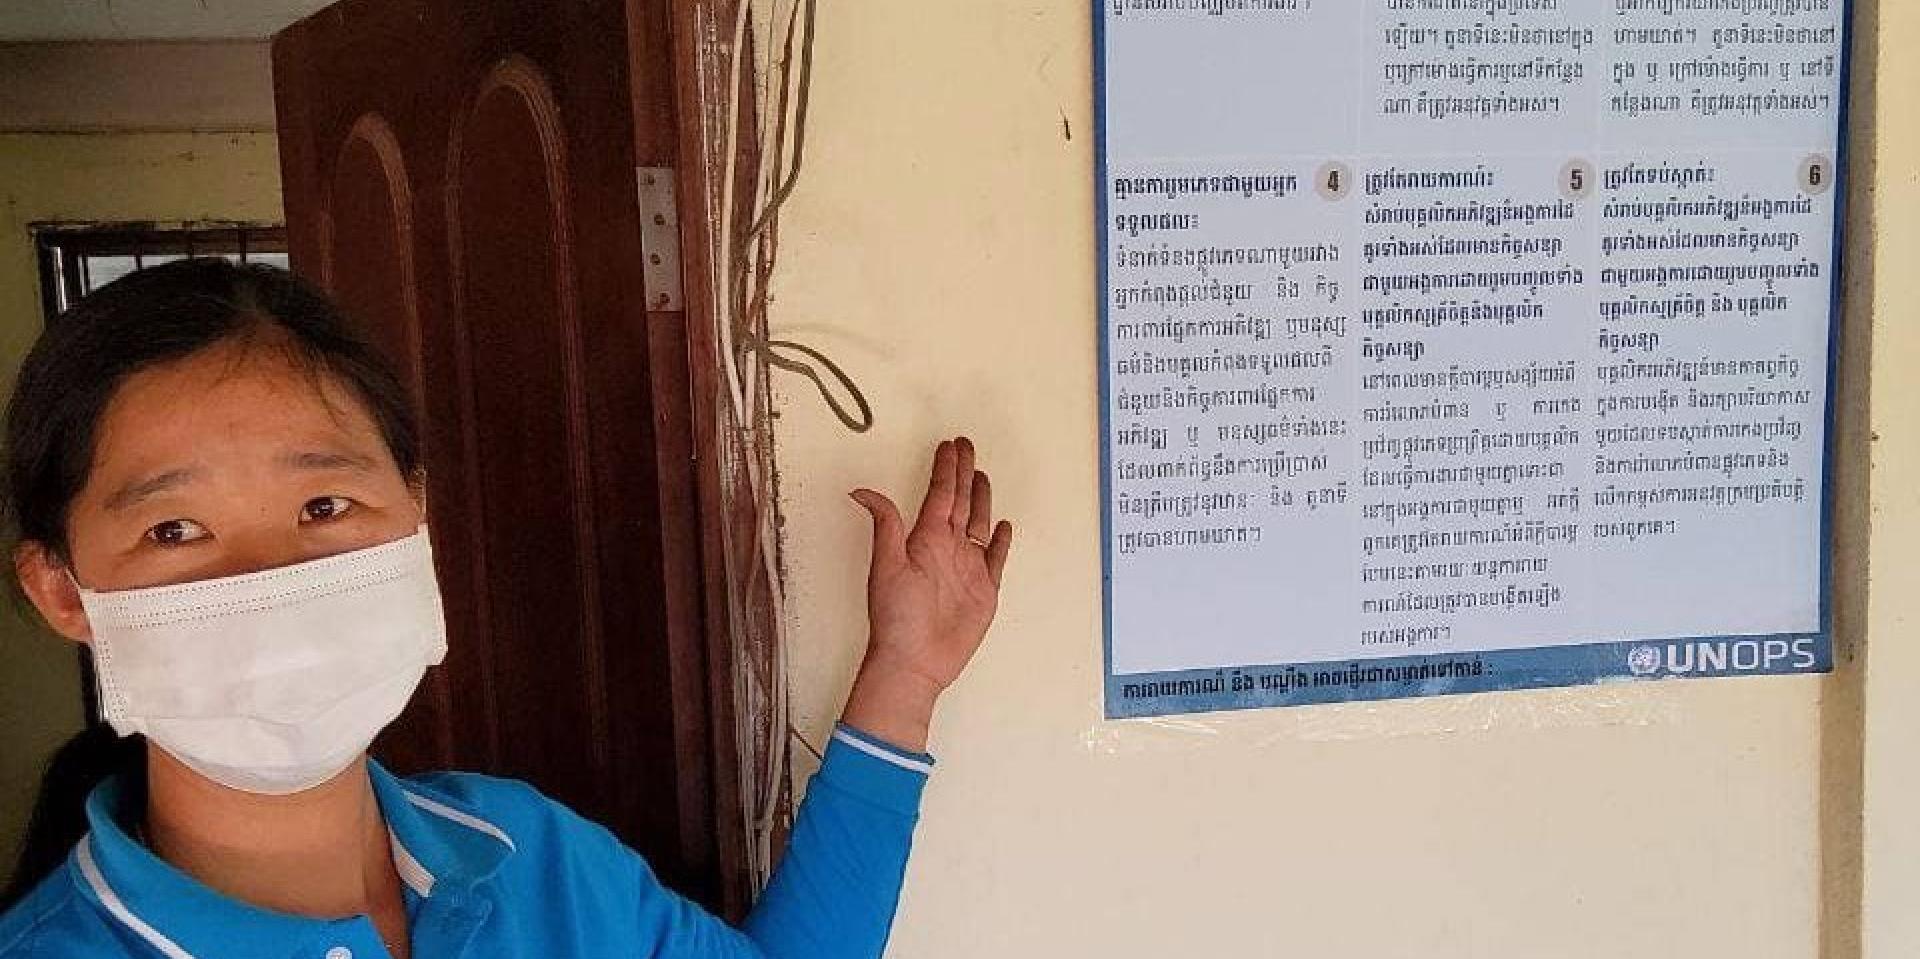 A Catholic Relief Services (CRS) staff-member explains PSEA principles in the PSEA poster at the CRS office in Preah Vihear Province, Cambodia ©Catholic Relief Services